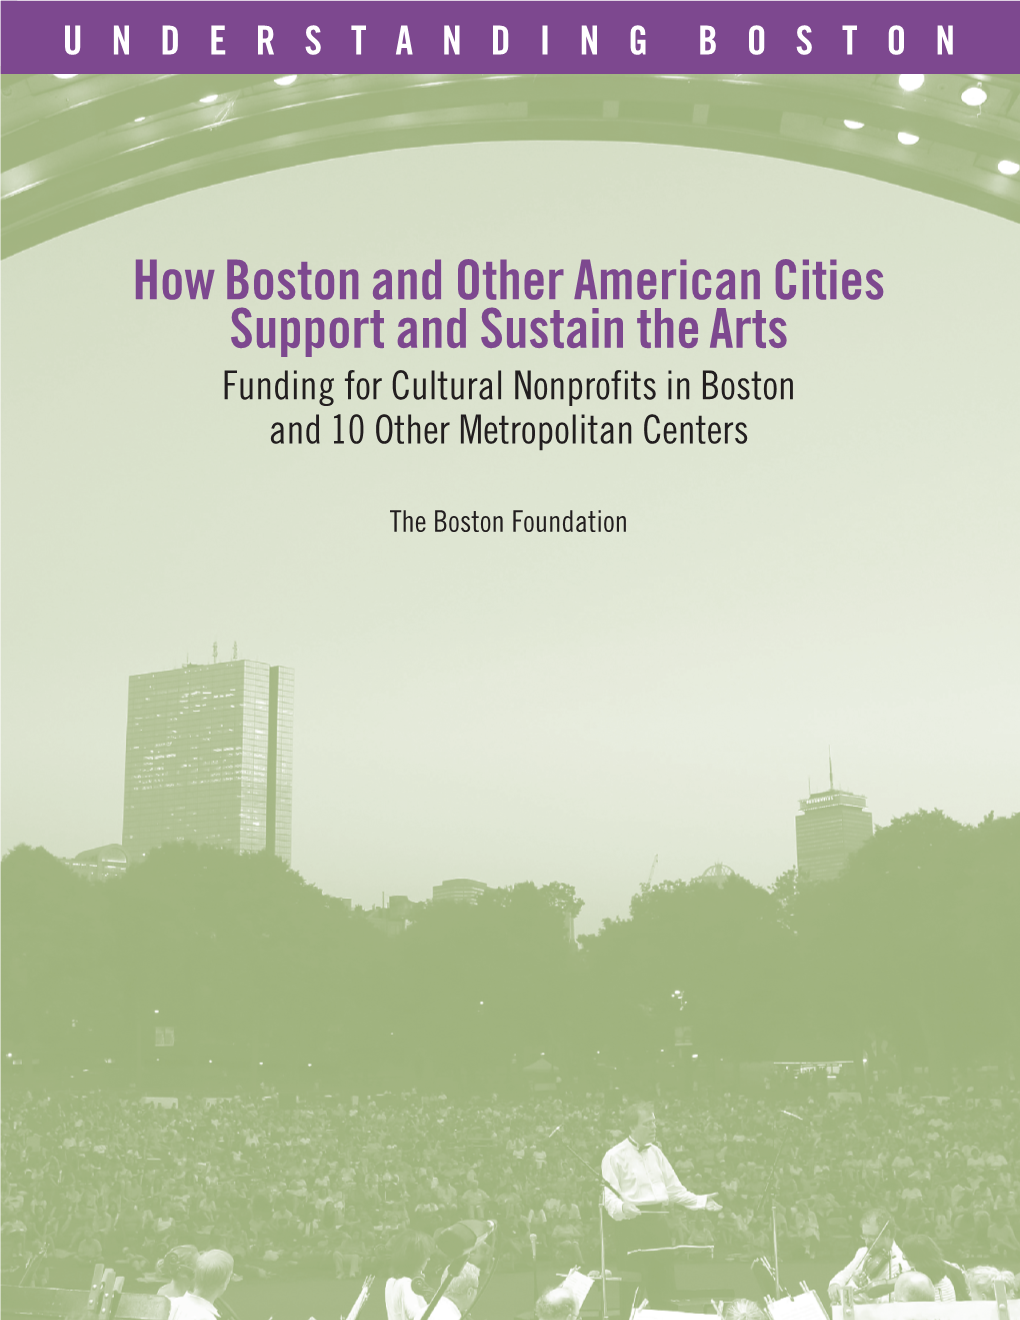 How Boston and Other American Cities Support and Sustain the Arts Funding for Cultural Nonprofits in Boston and 10 Other Metropolitan Centers